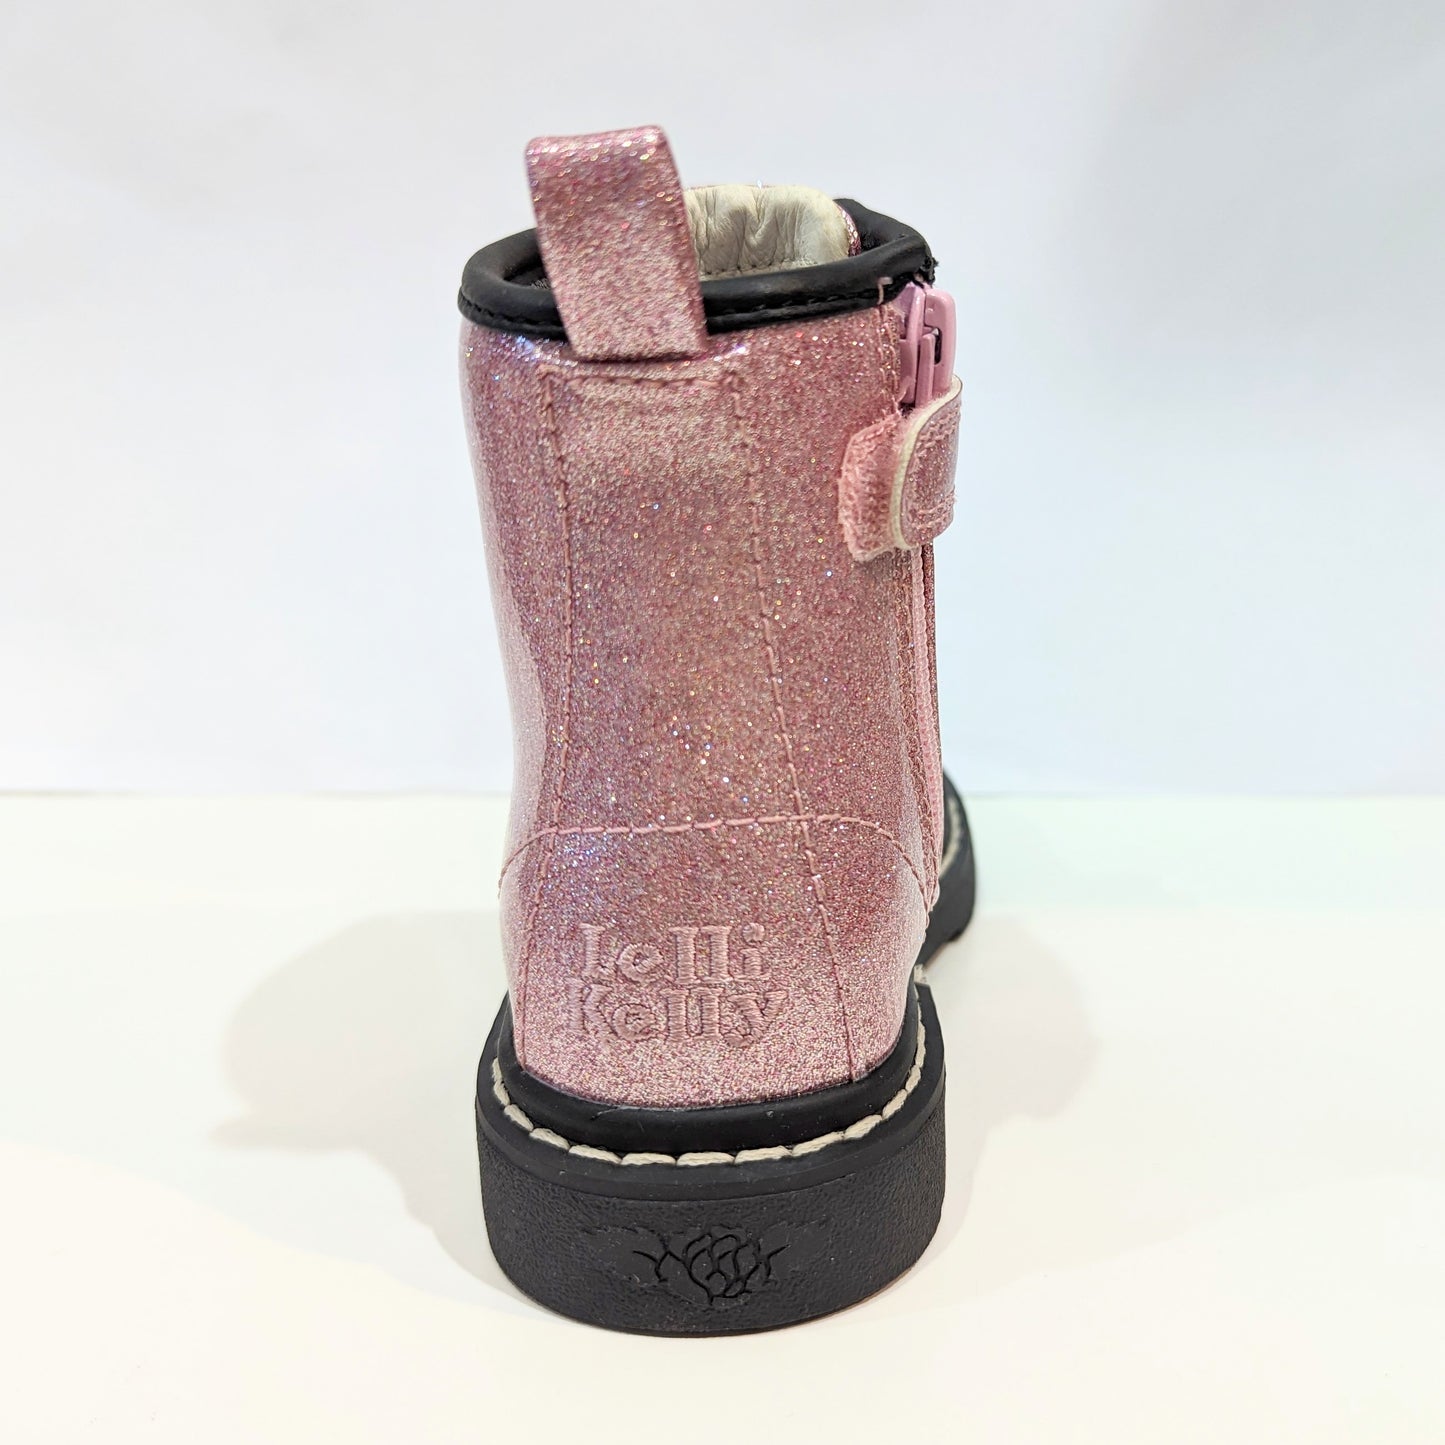 A girls boot by Lelli Kelly, style Emma, in pink glitter patent with zip and lace fastening. Back view of embroidery.